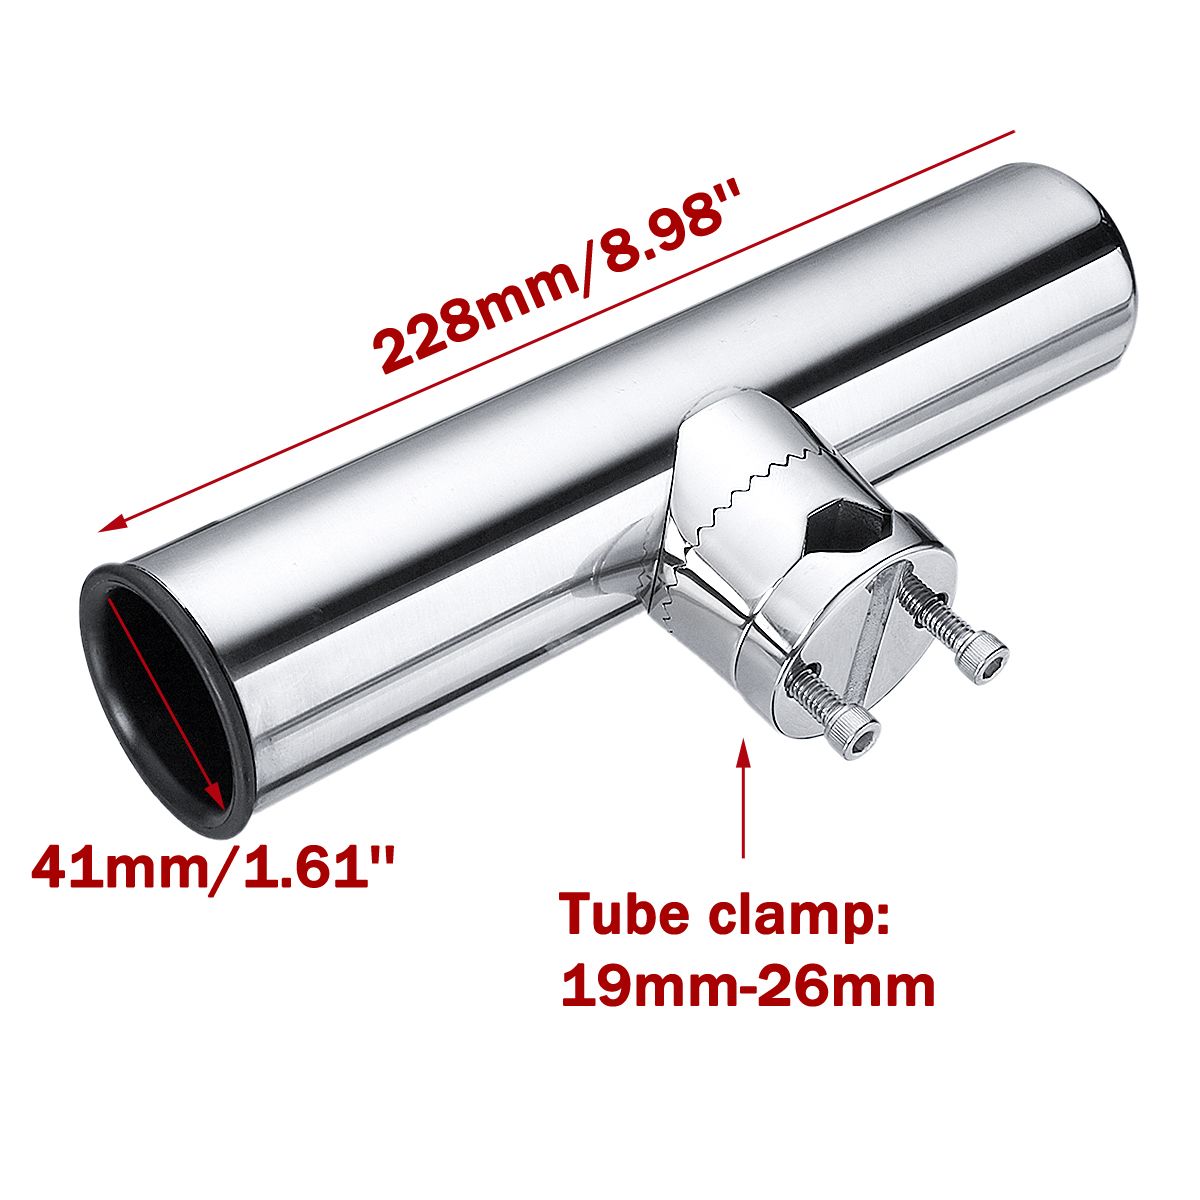 19mm-26mm-Stainless-Steel-Fishing-Rod-Holder-Marine-Boat-Tackle-Clamp-On-Rails-Mount-1341786